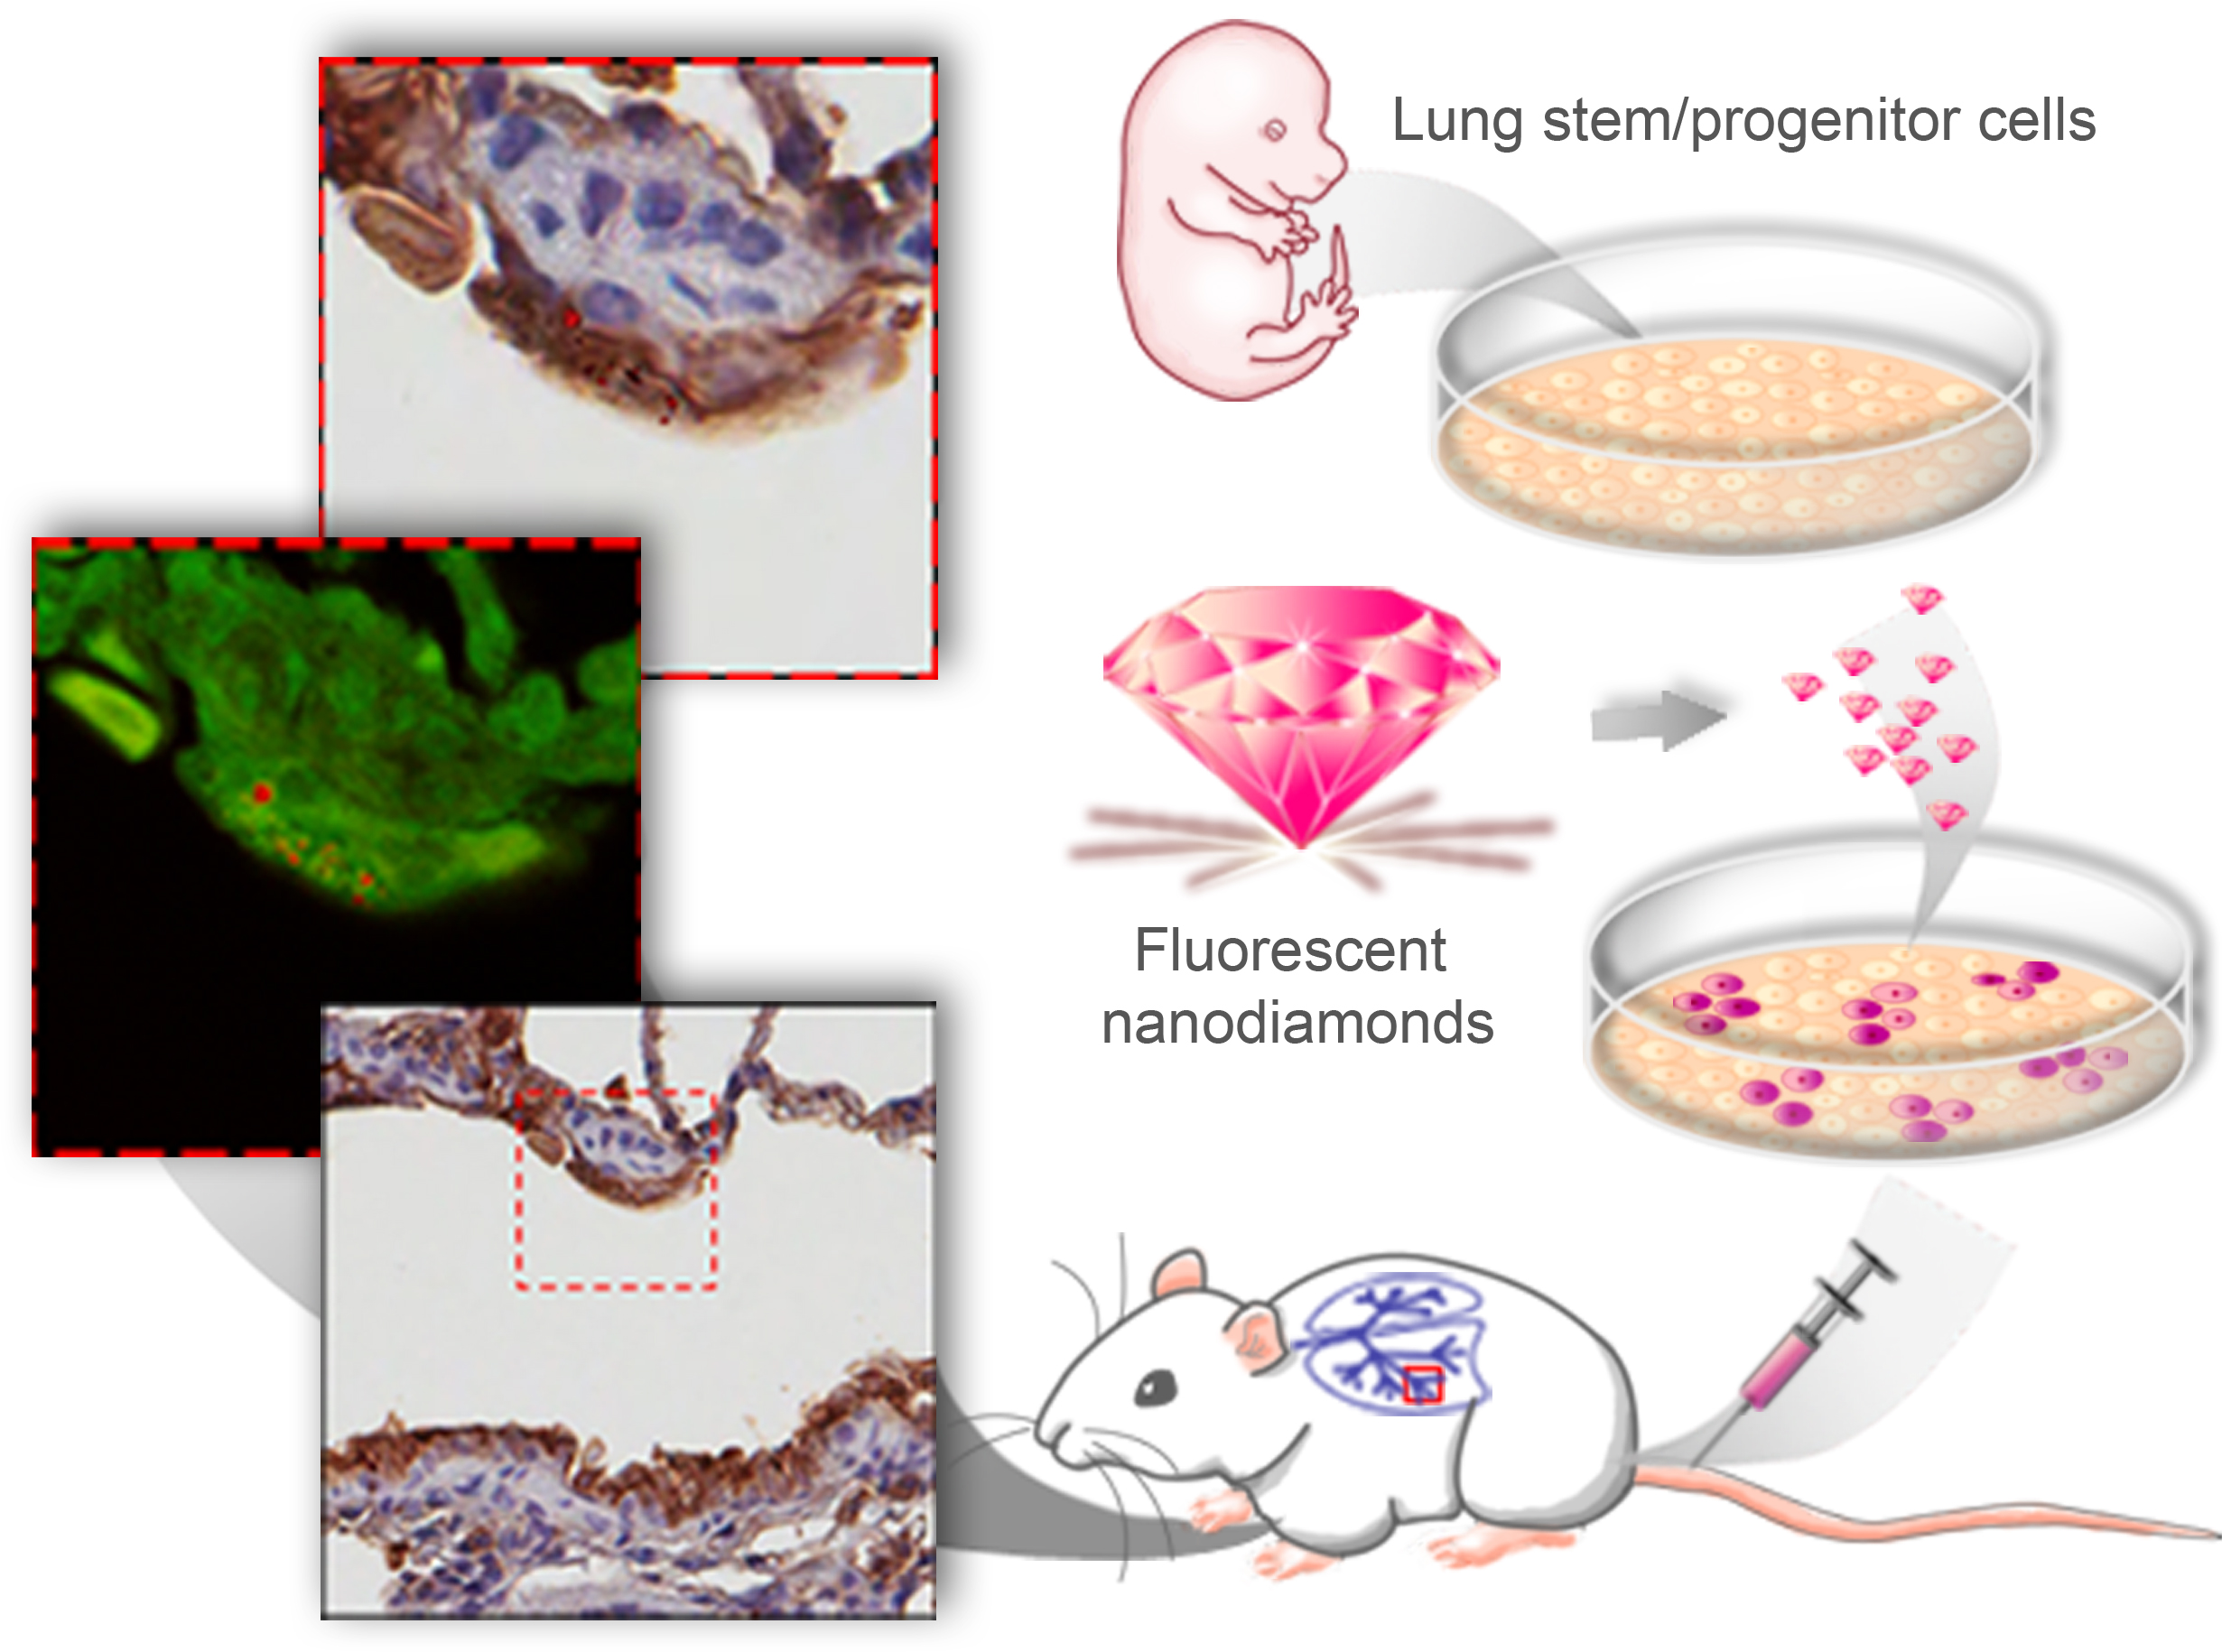 Tracking the Engraftment and Regenerative Capabilities of Transplanted Lung Stem Cells Using Fluorescent Nanodiamonds